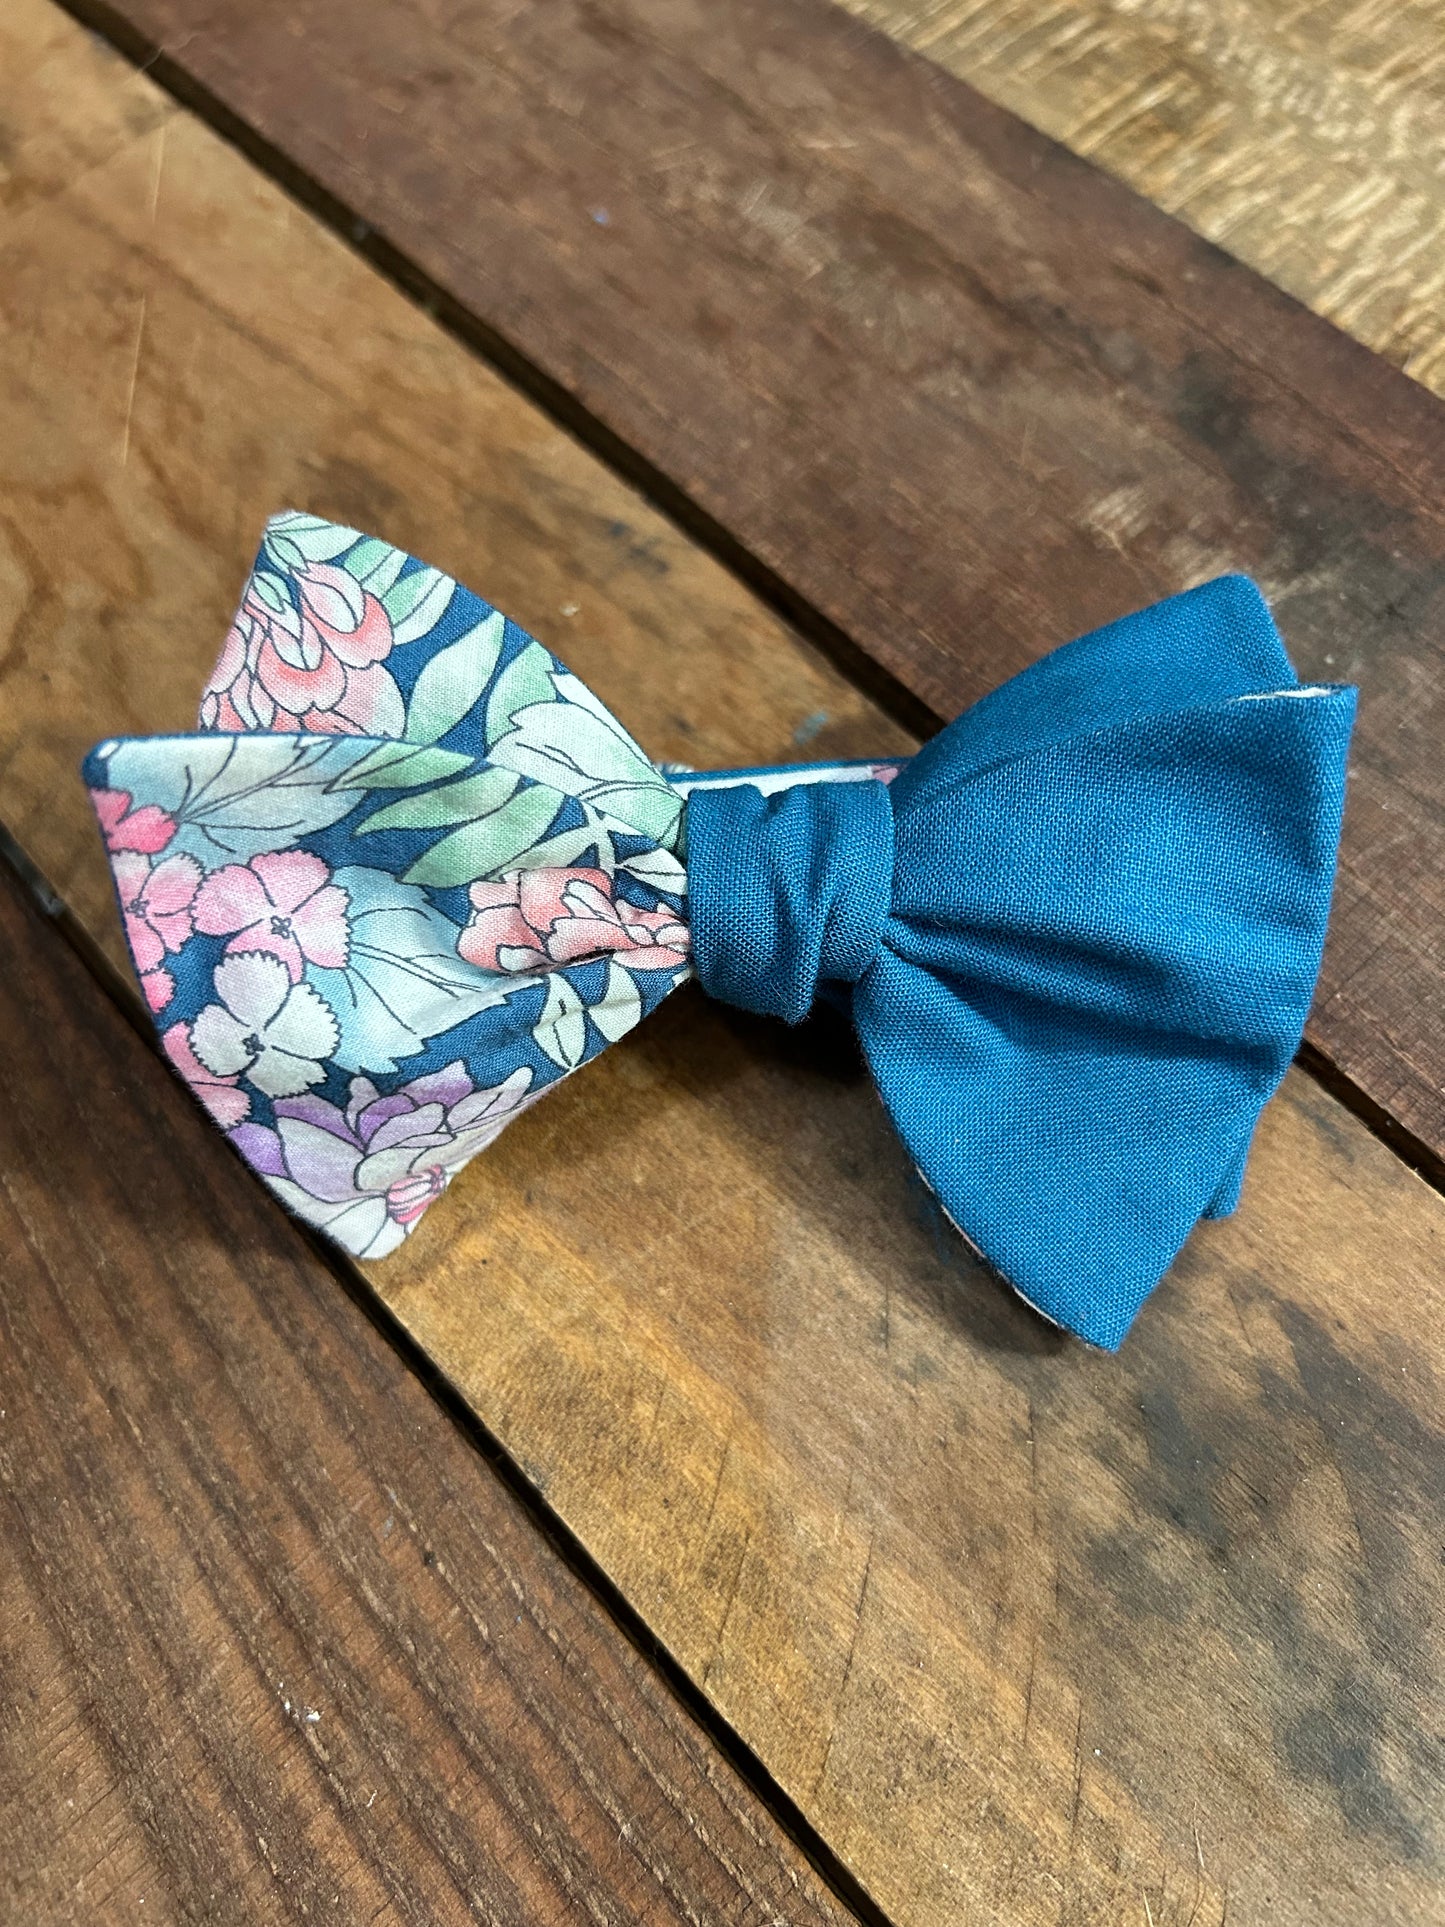 Solid Teal and Floral Bow Tie